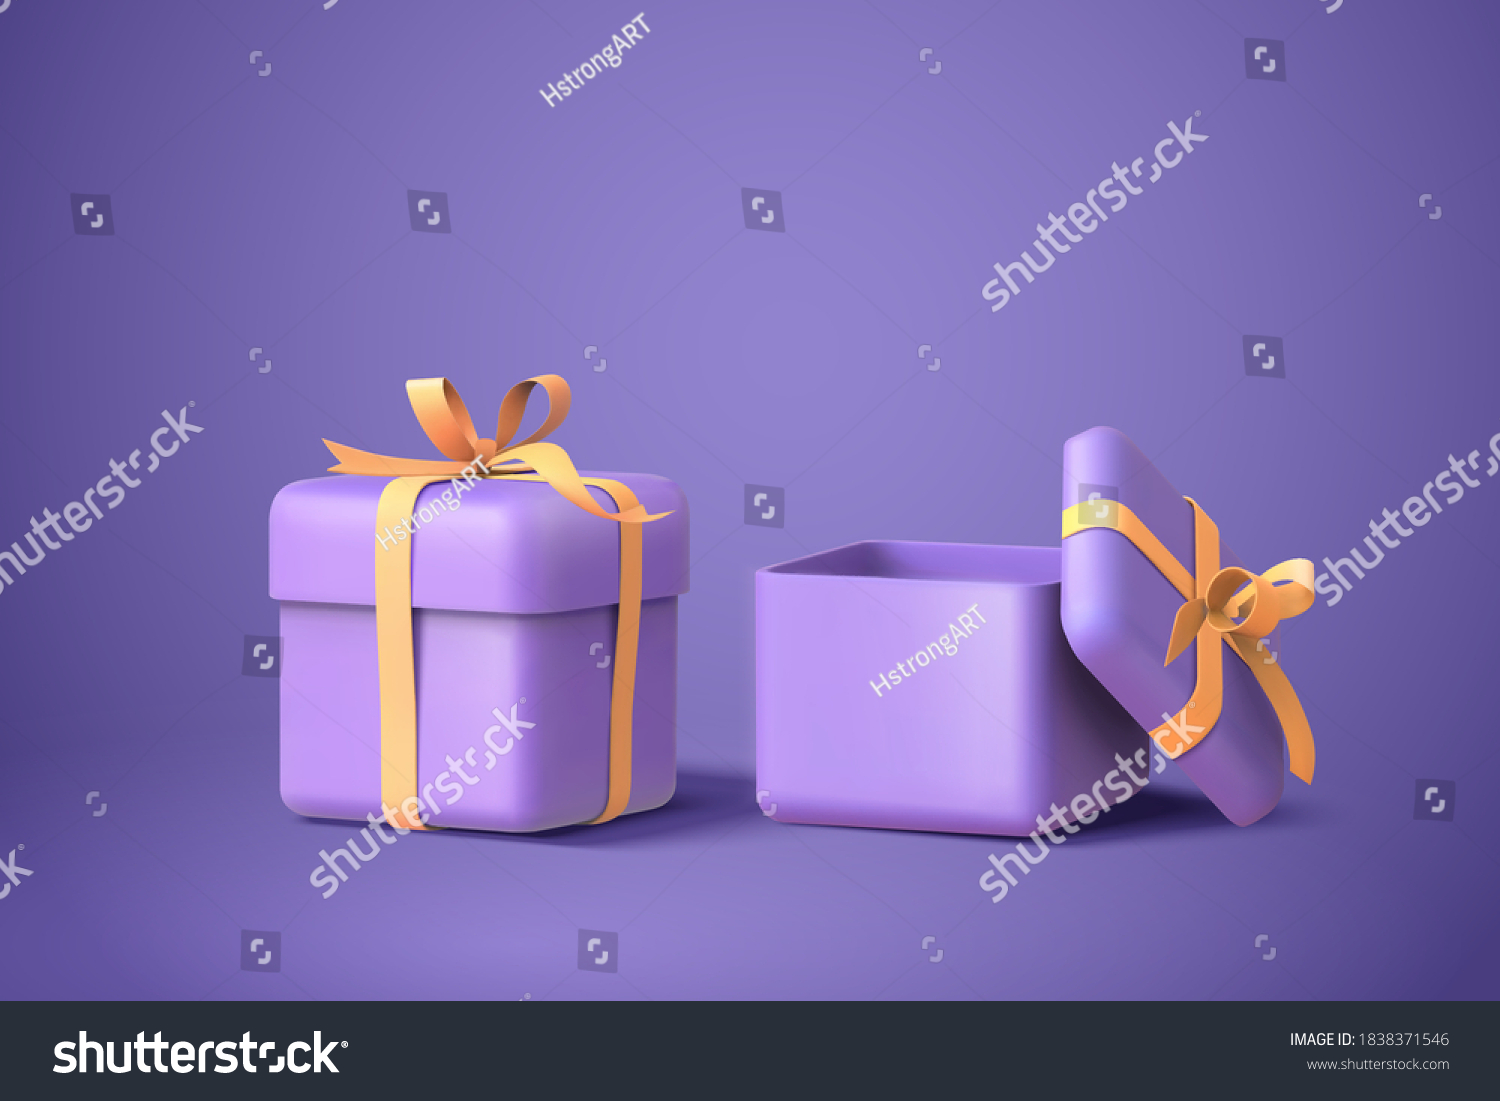 3d illustration of two purple gift boxes with bows and ribbons, isolated on purple background #1838371546